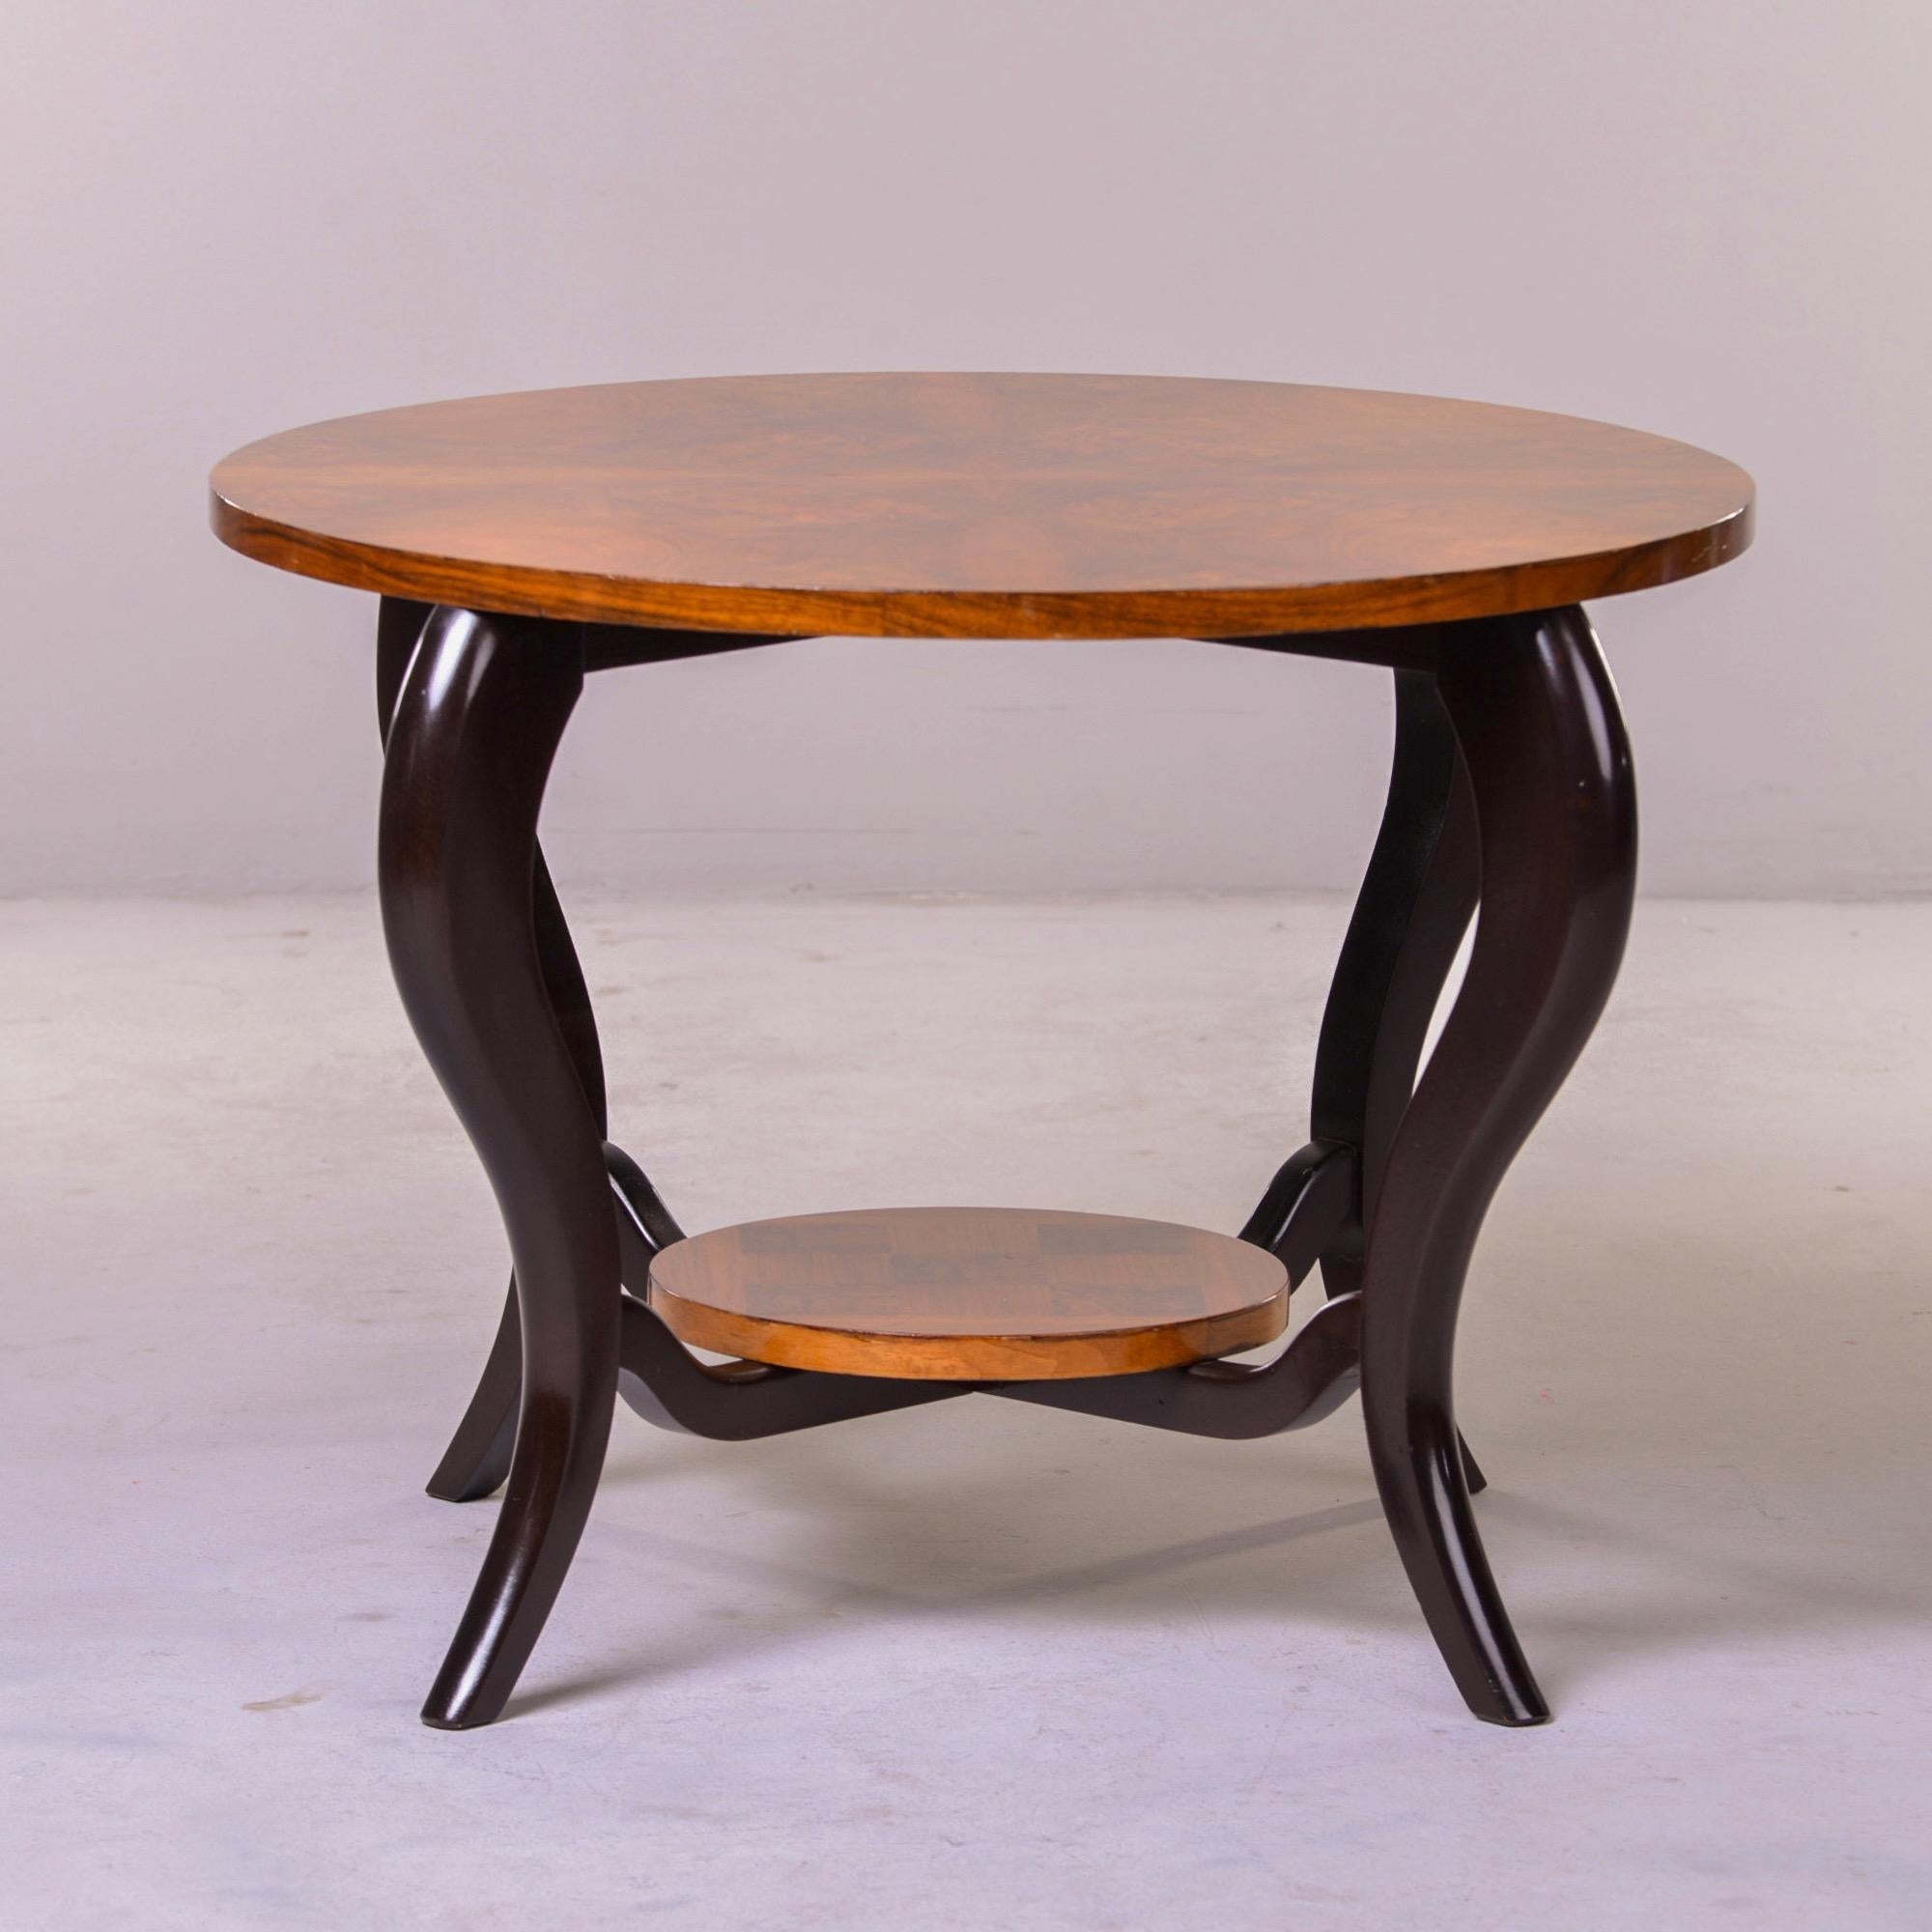 Parquetry French Art Deco Two Tier Round Burl Wood Table with Black Legs